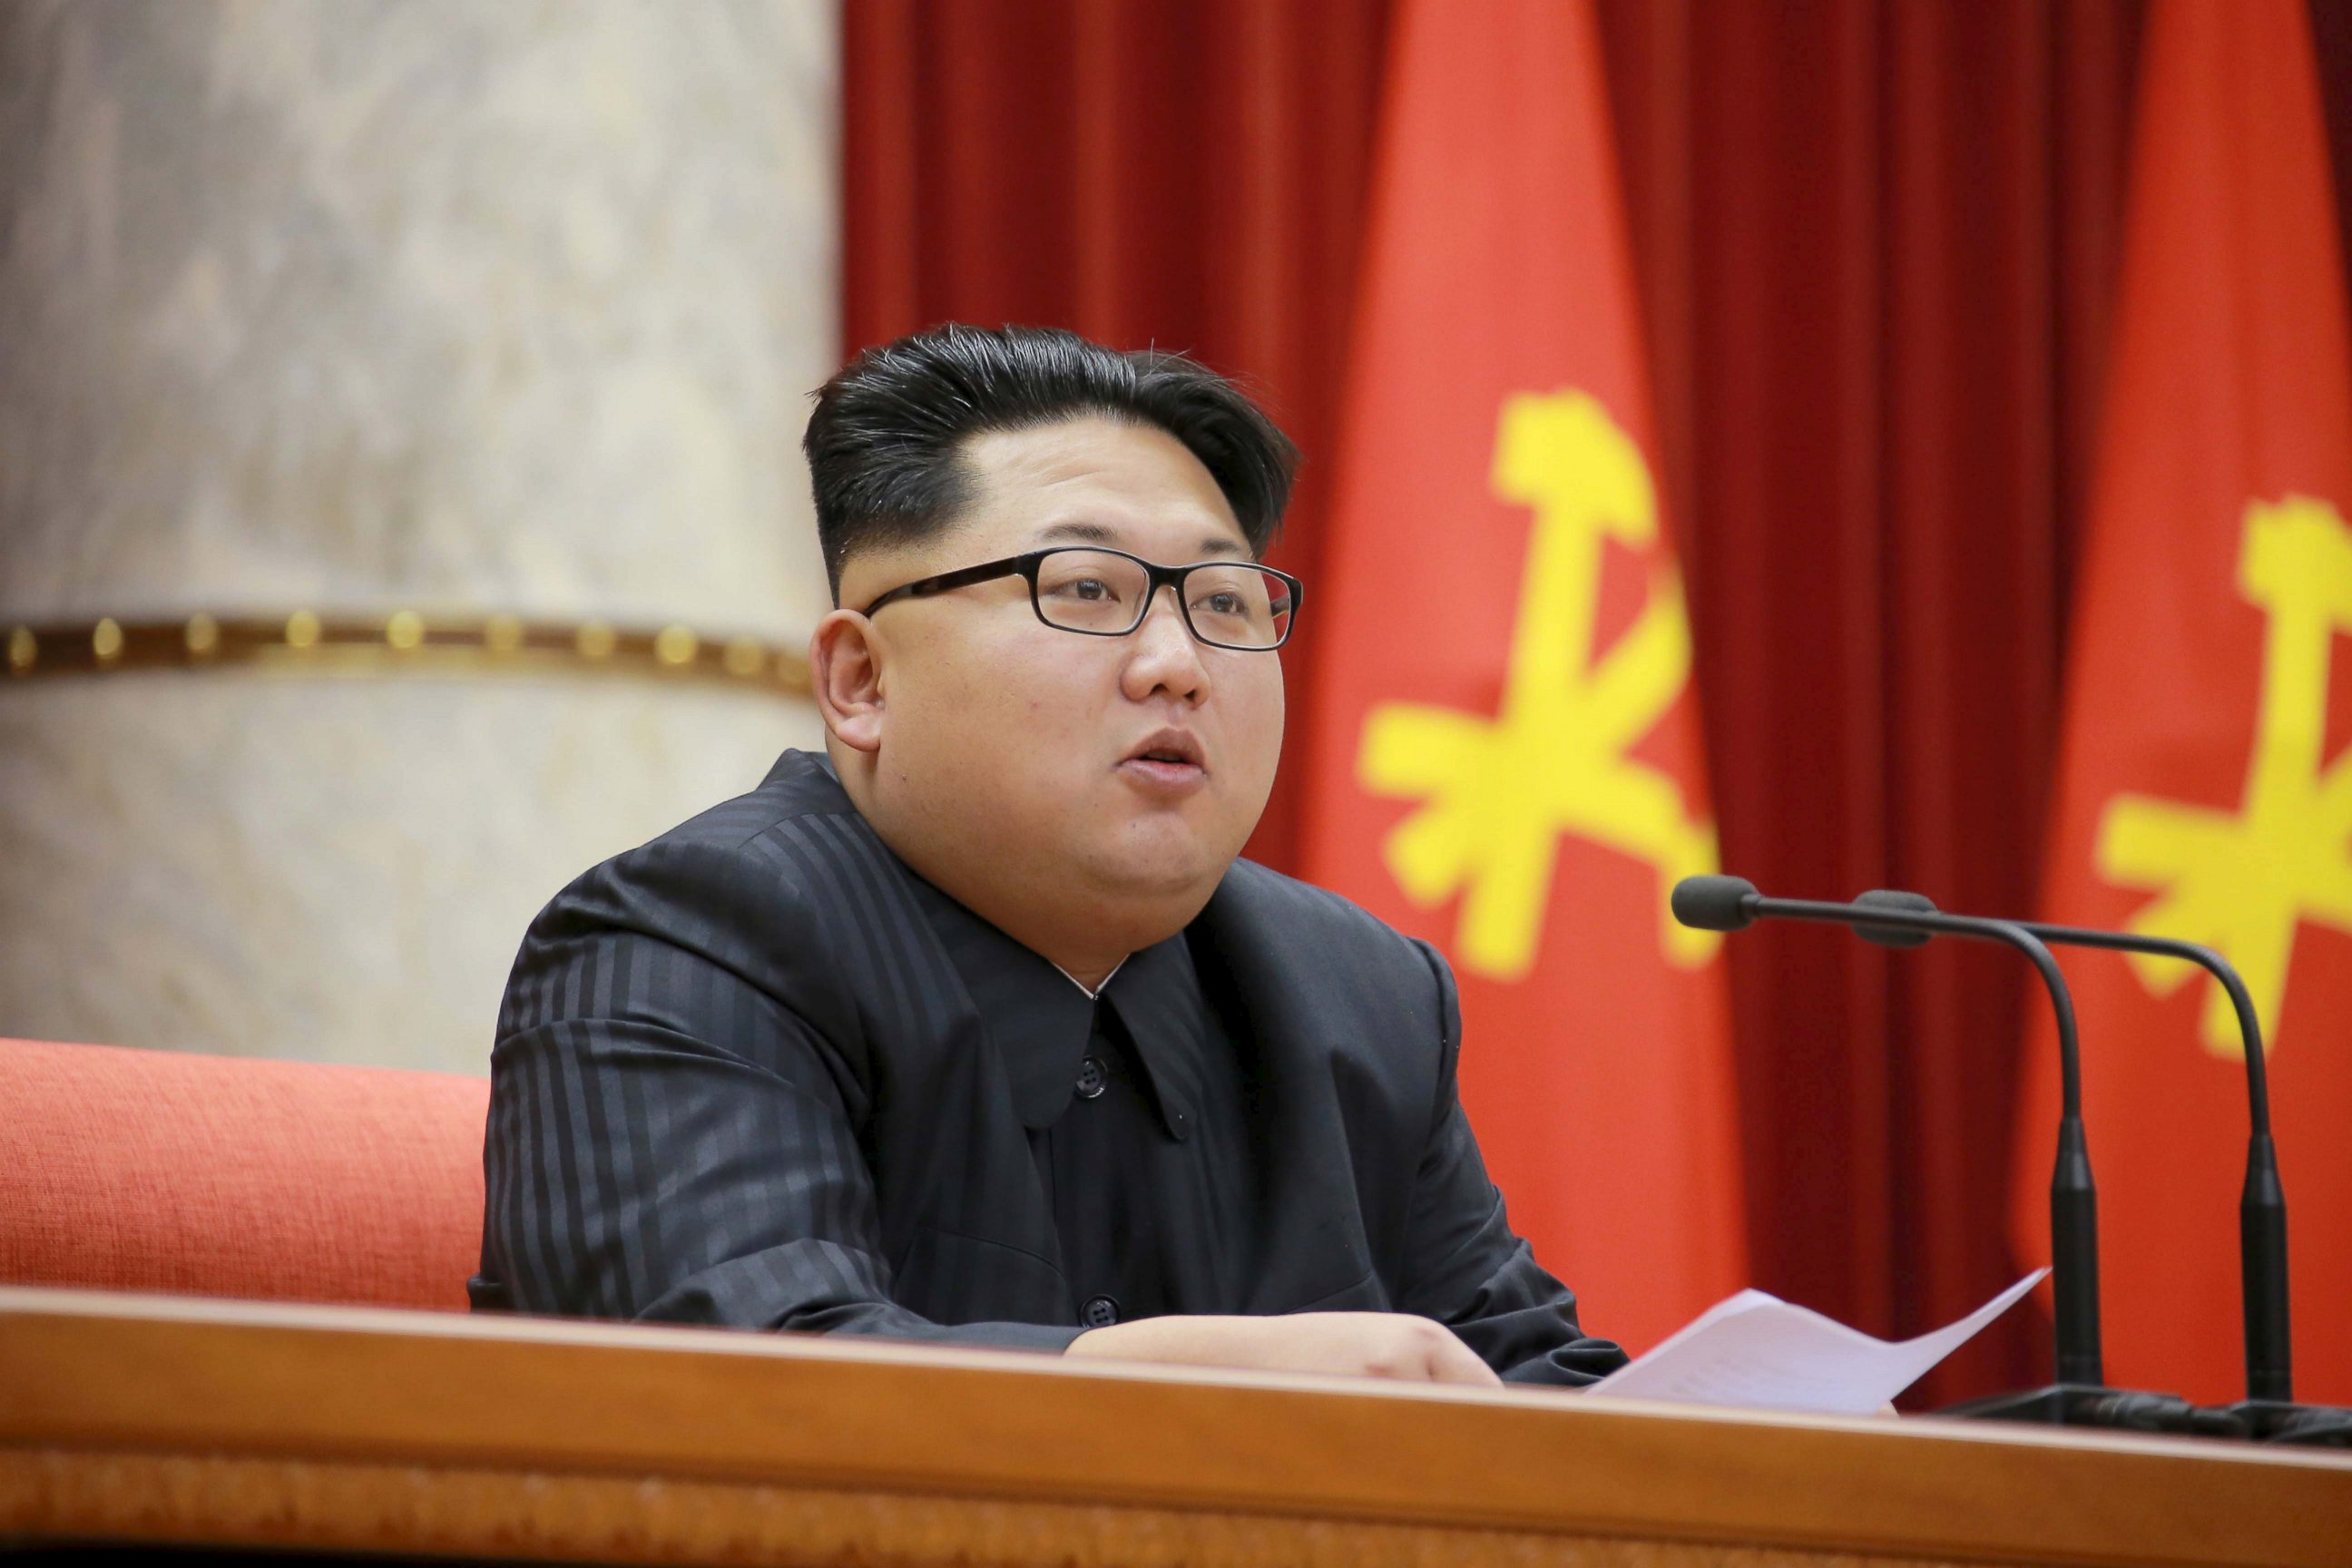 Pictures Of Kim Jong Un Wearing A Black Suit And 143263295 Added